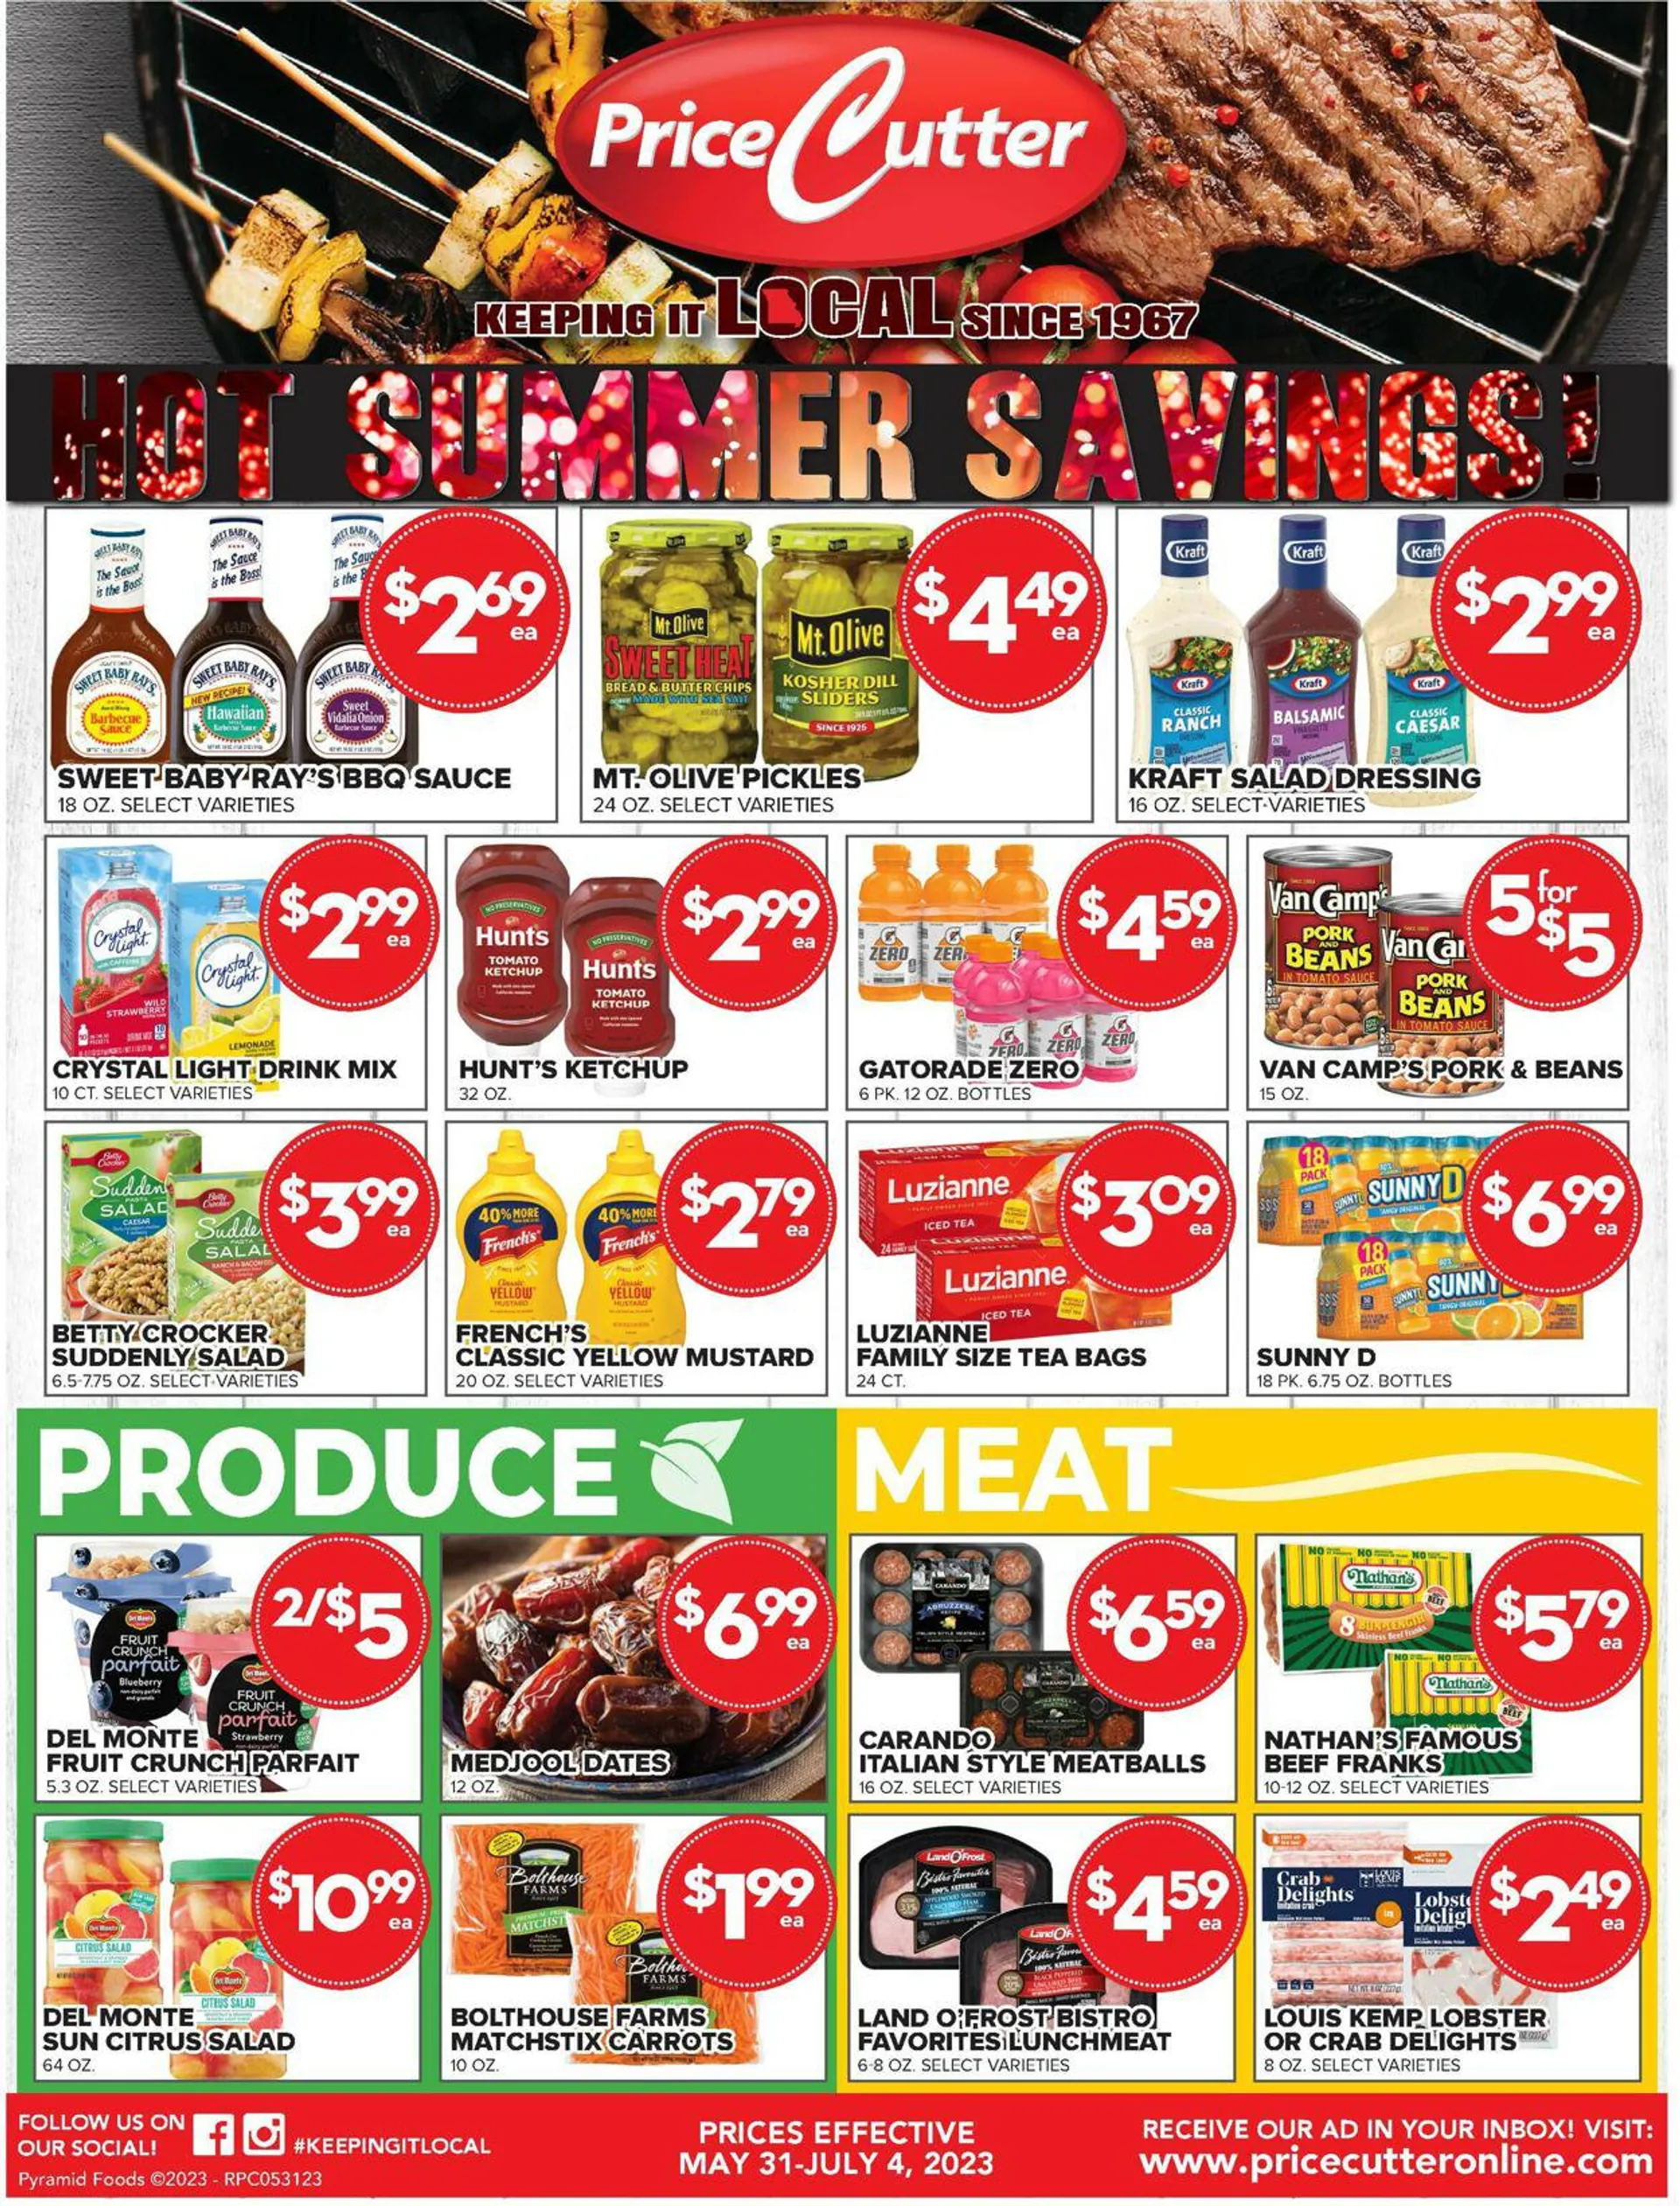 Price Cutter Current weekly ad - 1